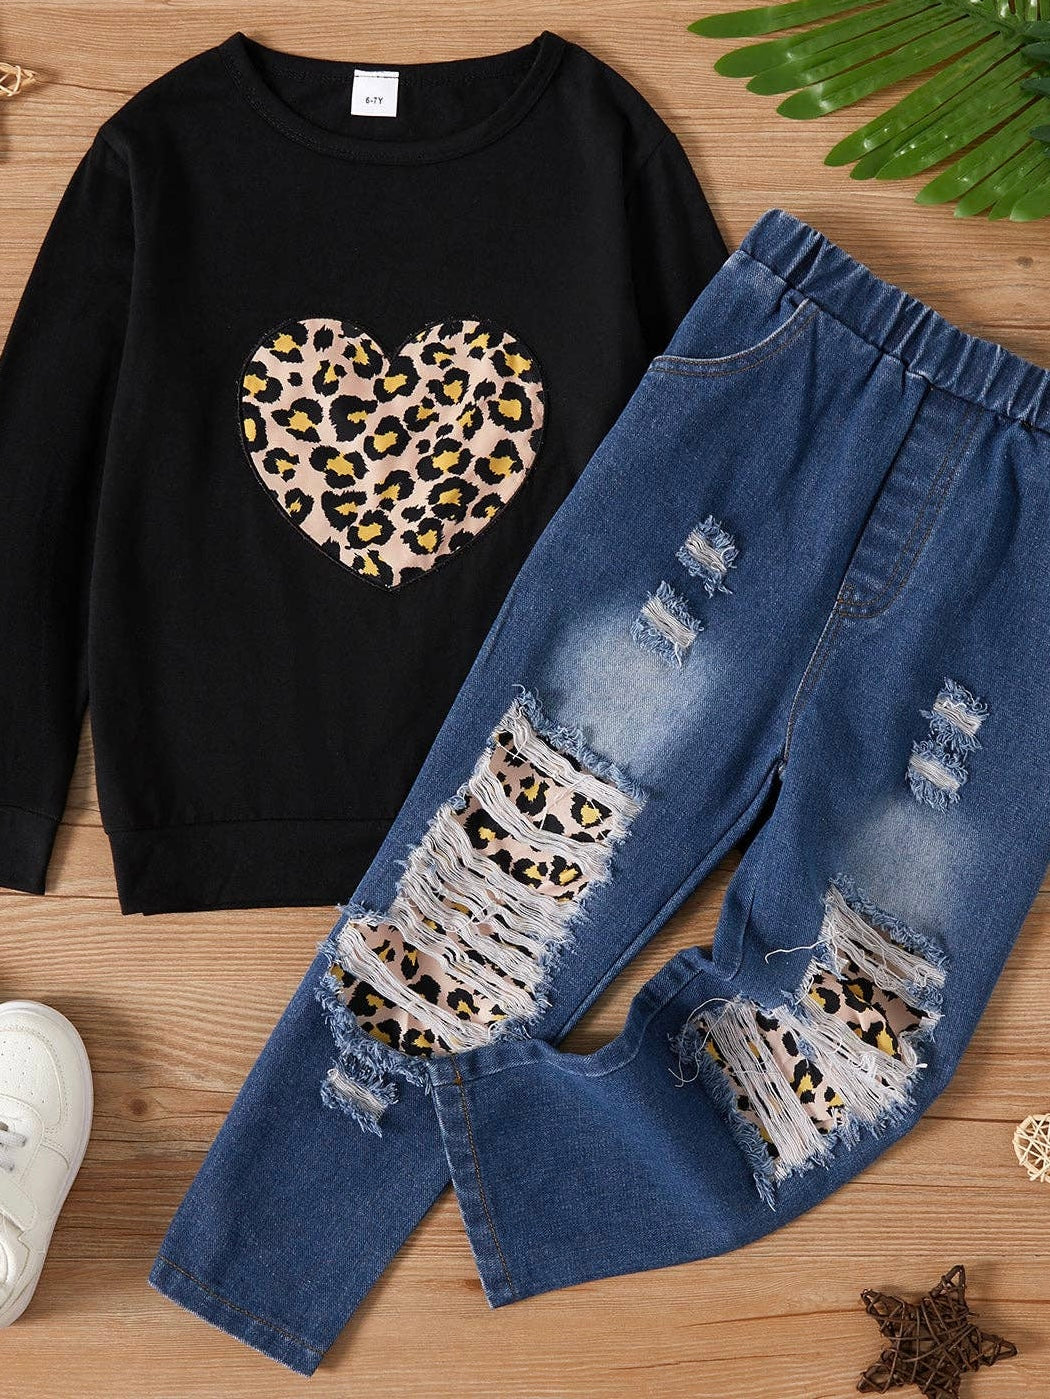 2 piece set long sleeve tee and jeans leopard print heart on tee and matching print showing through jeans rips